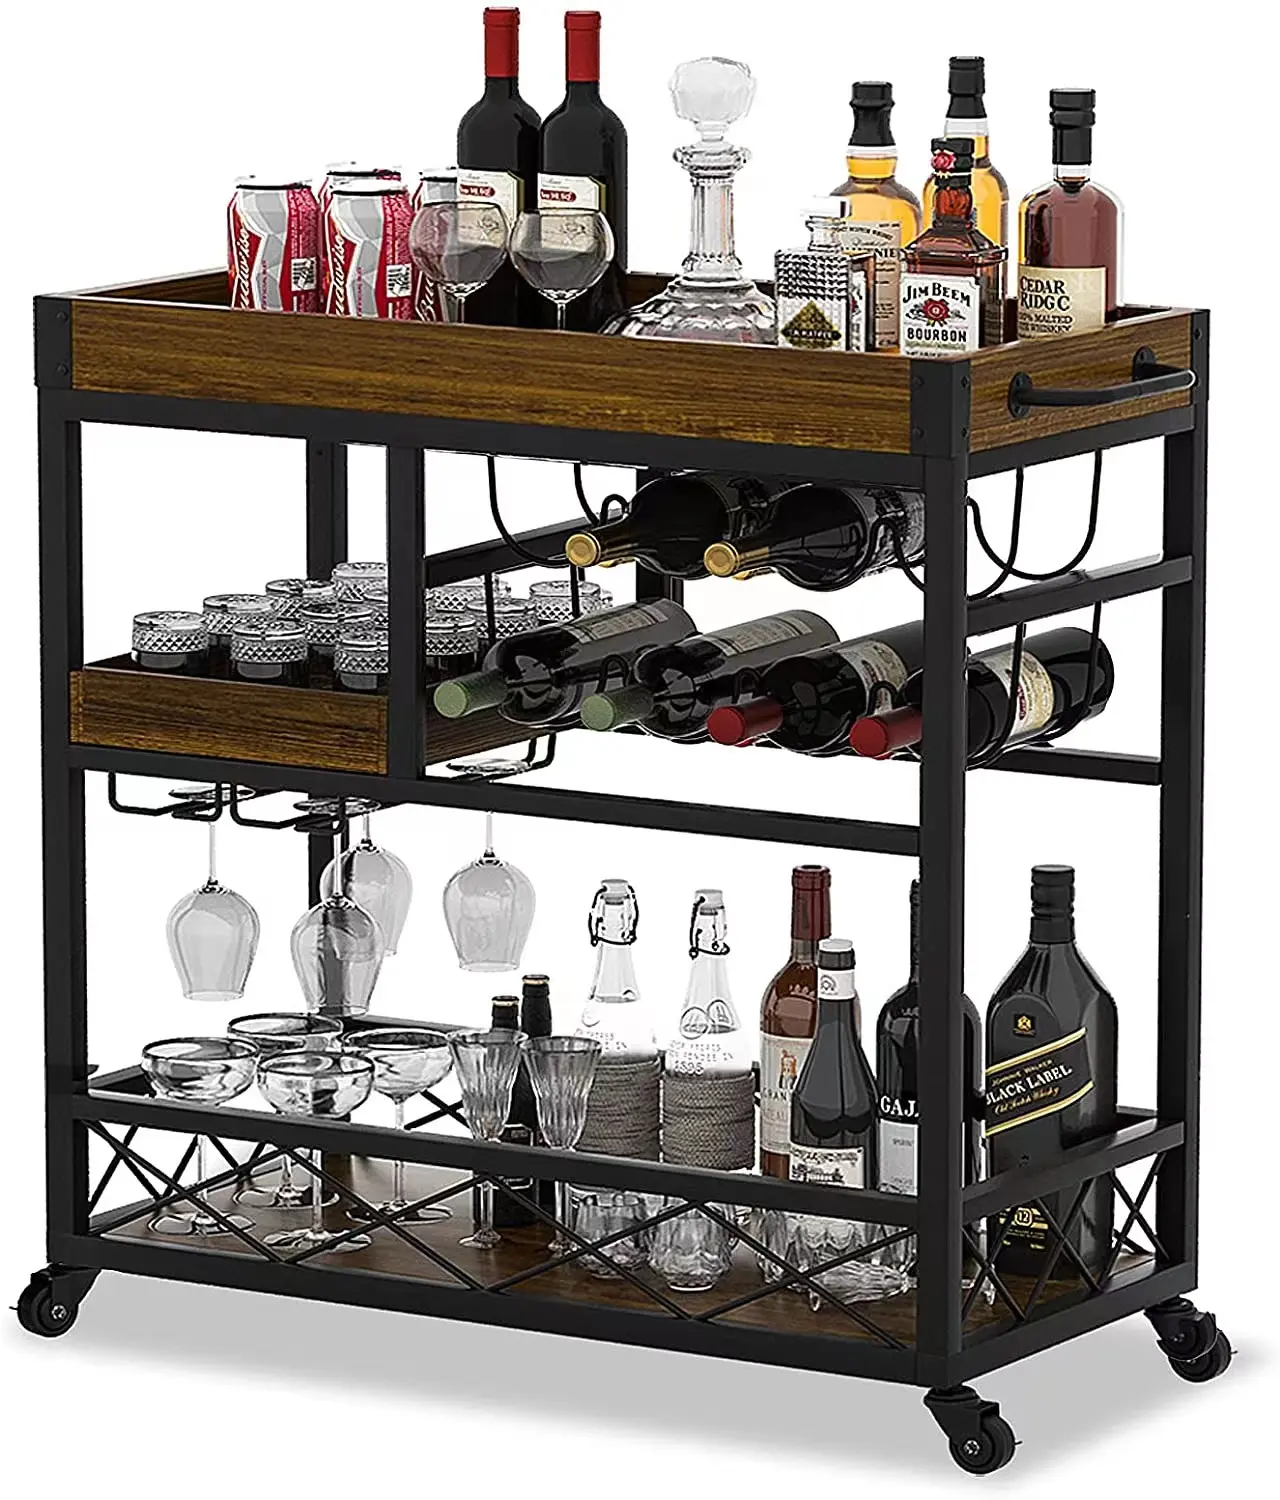 Industrial Kitchen Bar Serving Carts 3 Tier Storage Trolley with Wine Rack Glass Holder Rack for Kitchen Home